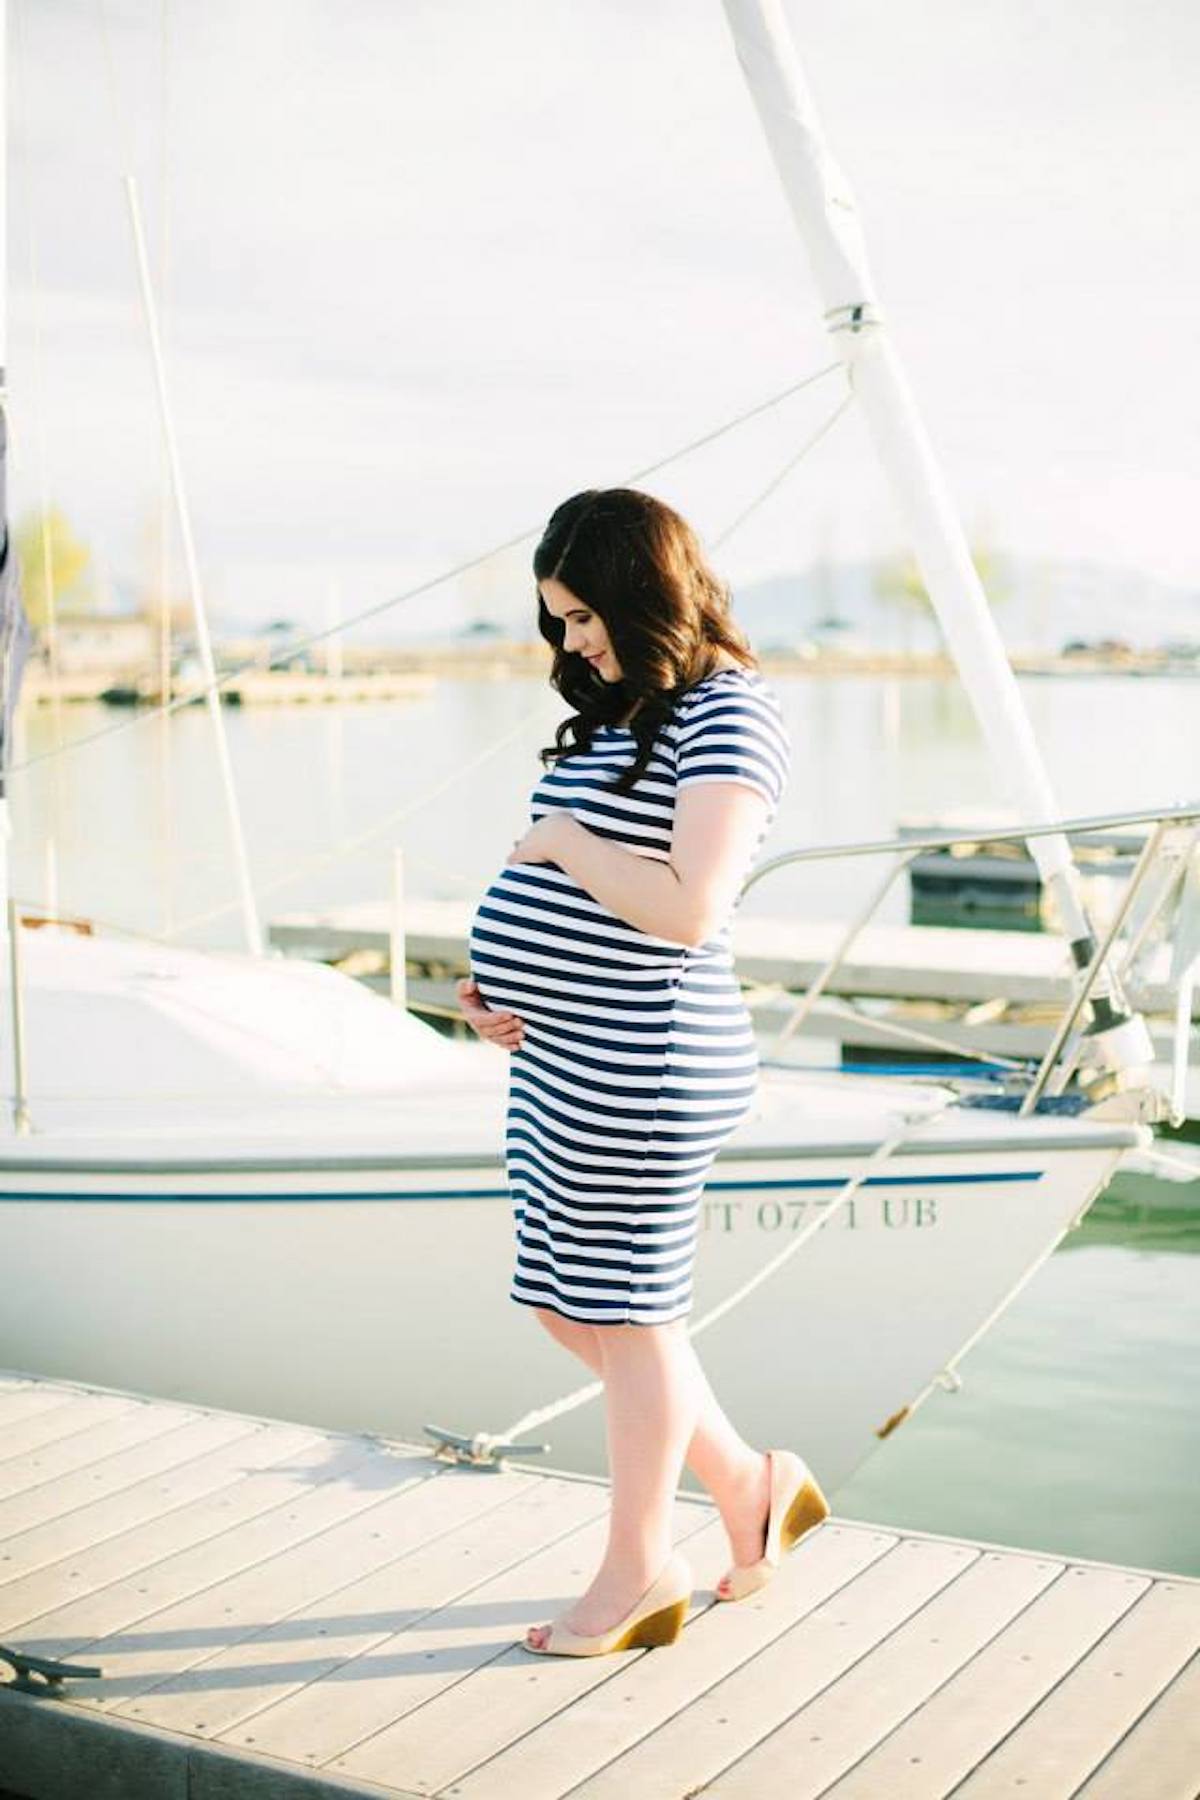 A pregnant woman wearing a striped dress holds her baby belly on a dock.